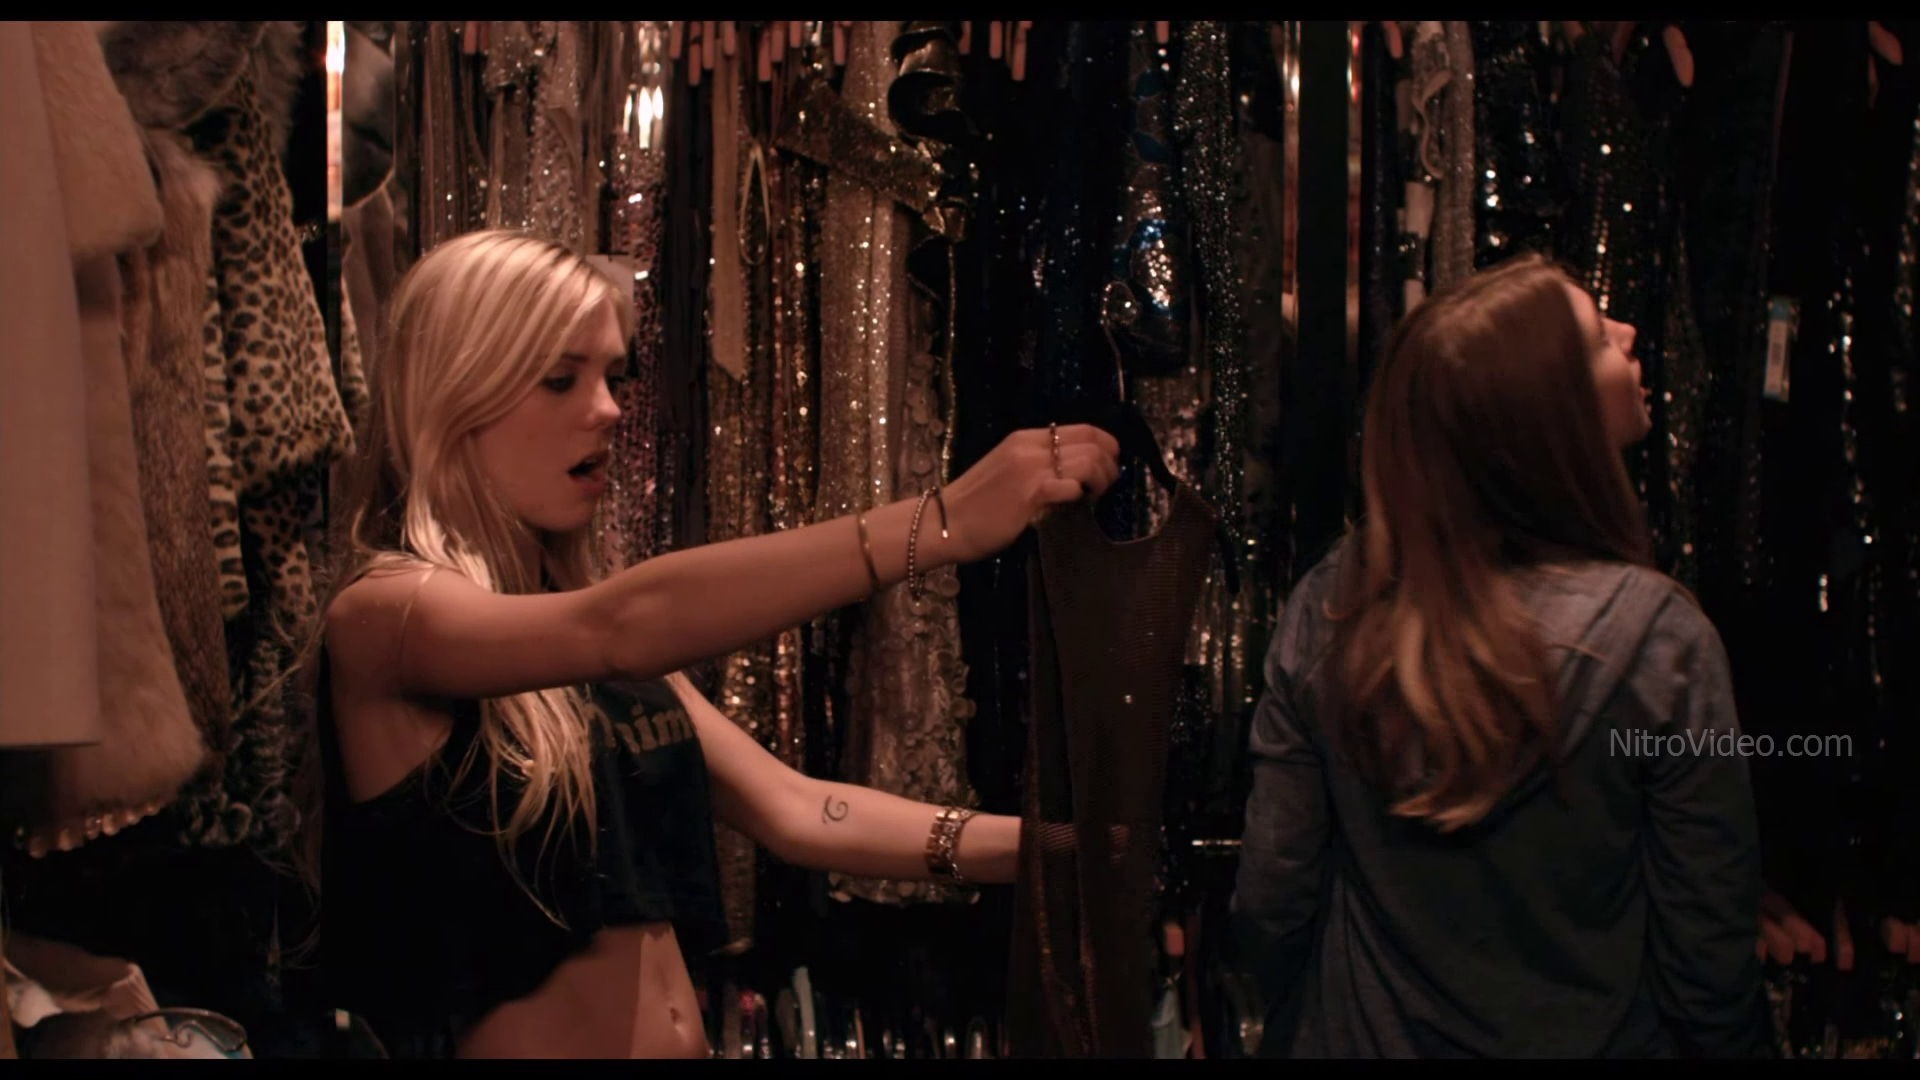 Claire Julien nude or sexy in The Bling Ring Blu-ray - Video Clip #01.